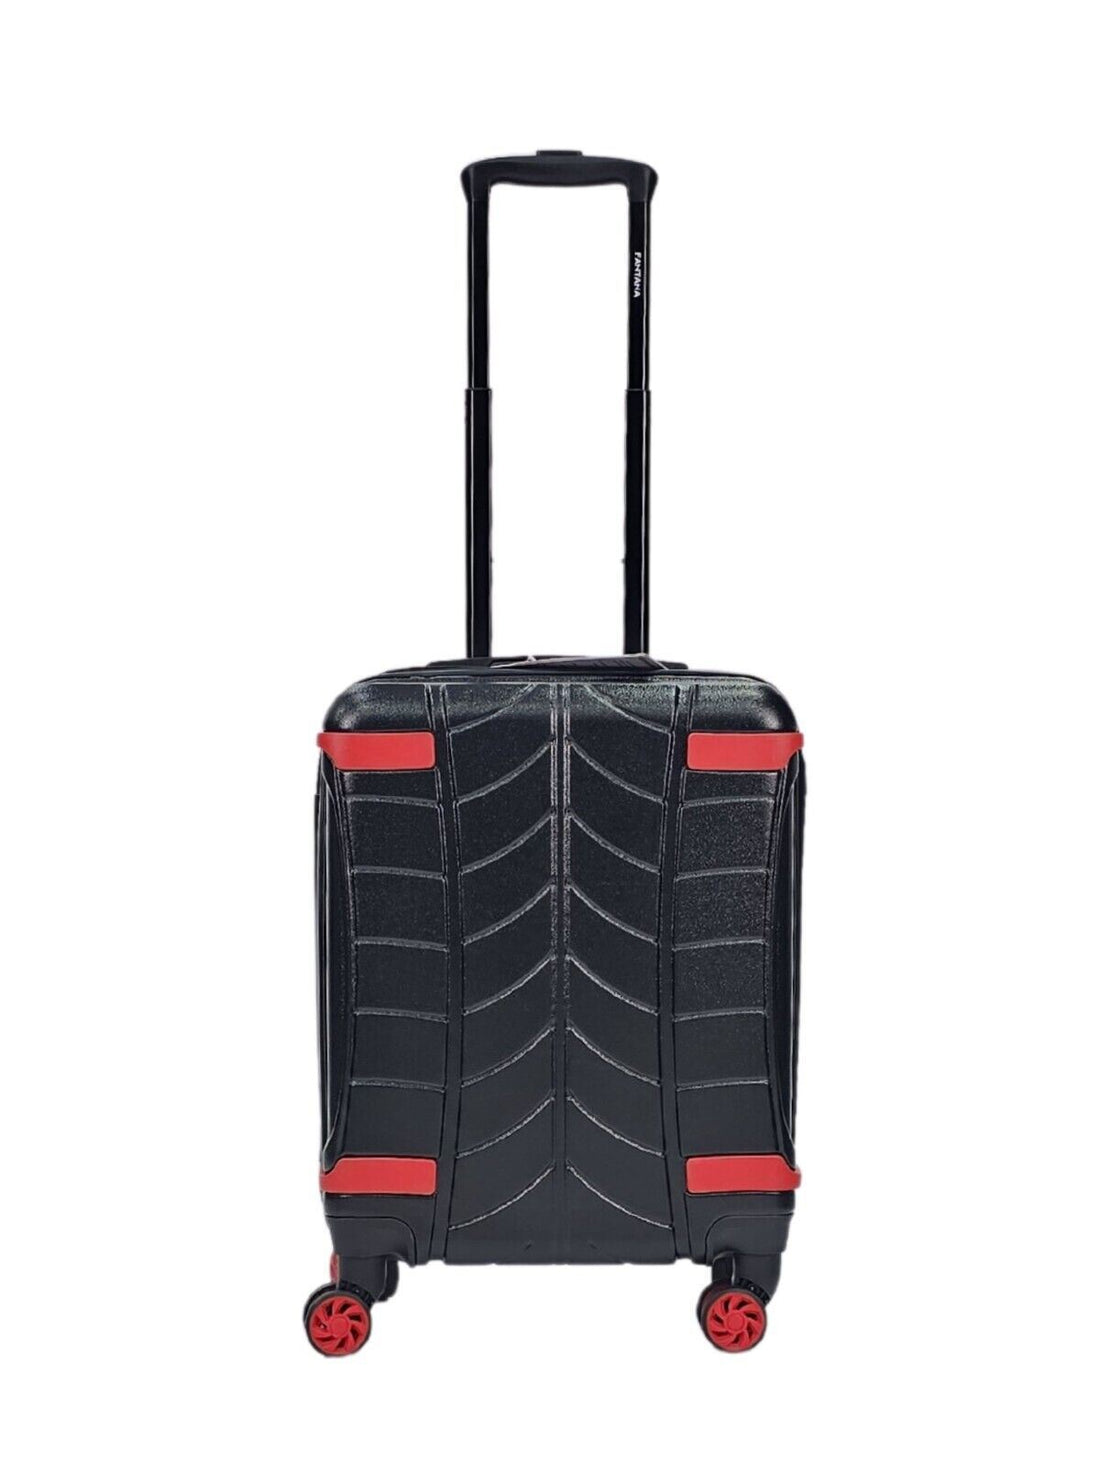 Bynum Cabin Hard Shell Suitcase in Black